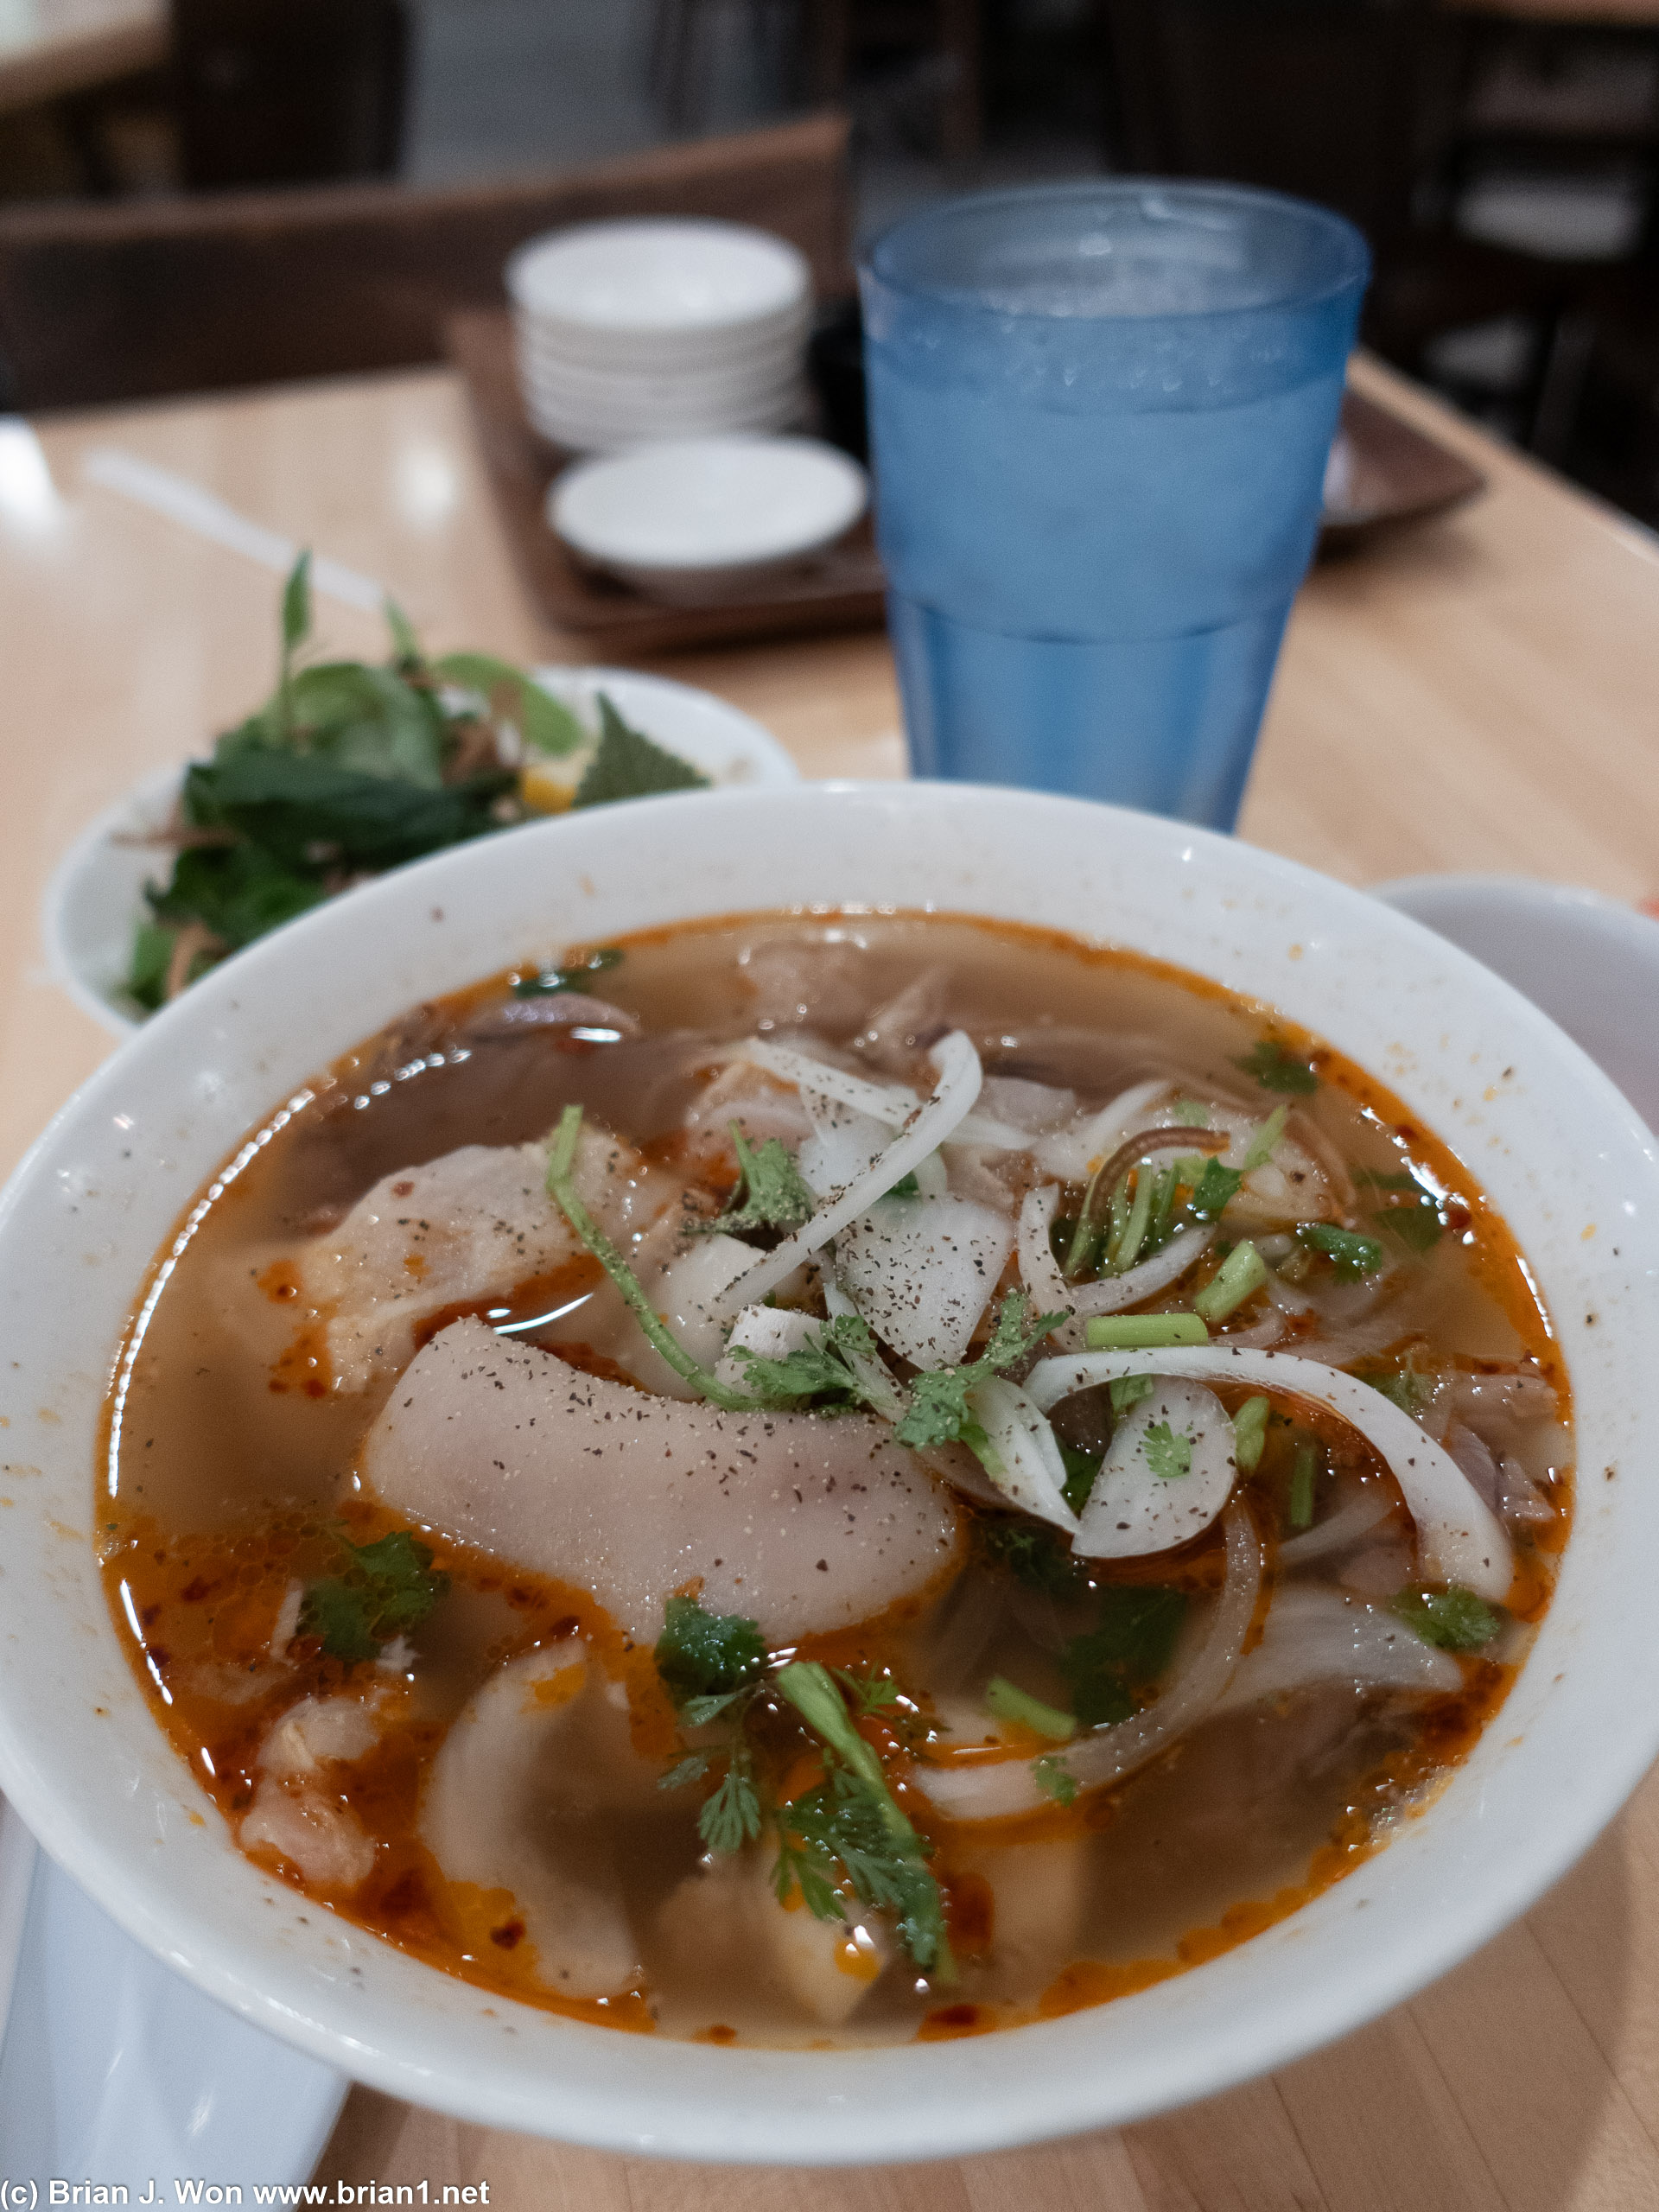 Nom, but not my fave place for bun bo hue.